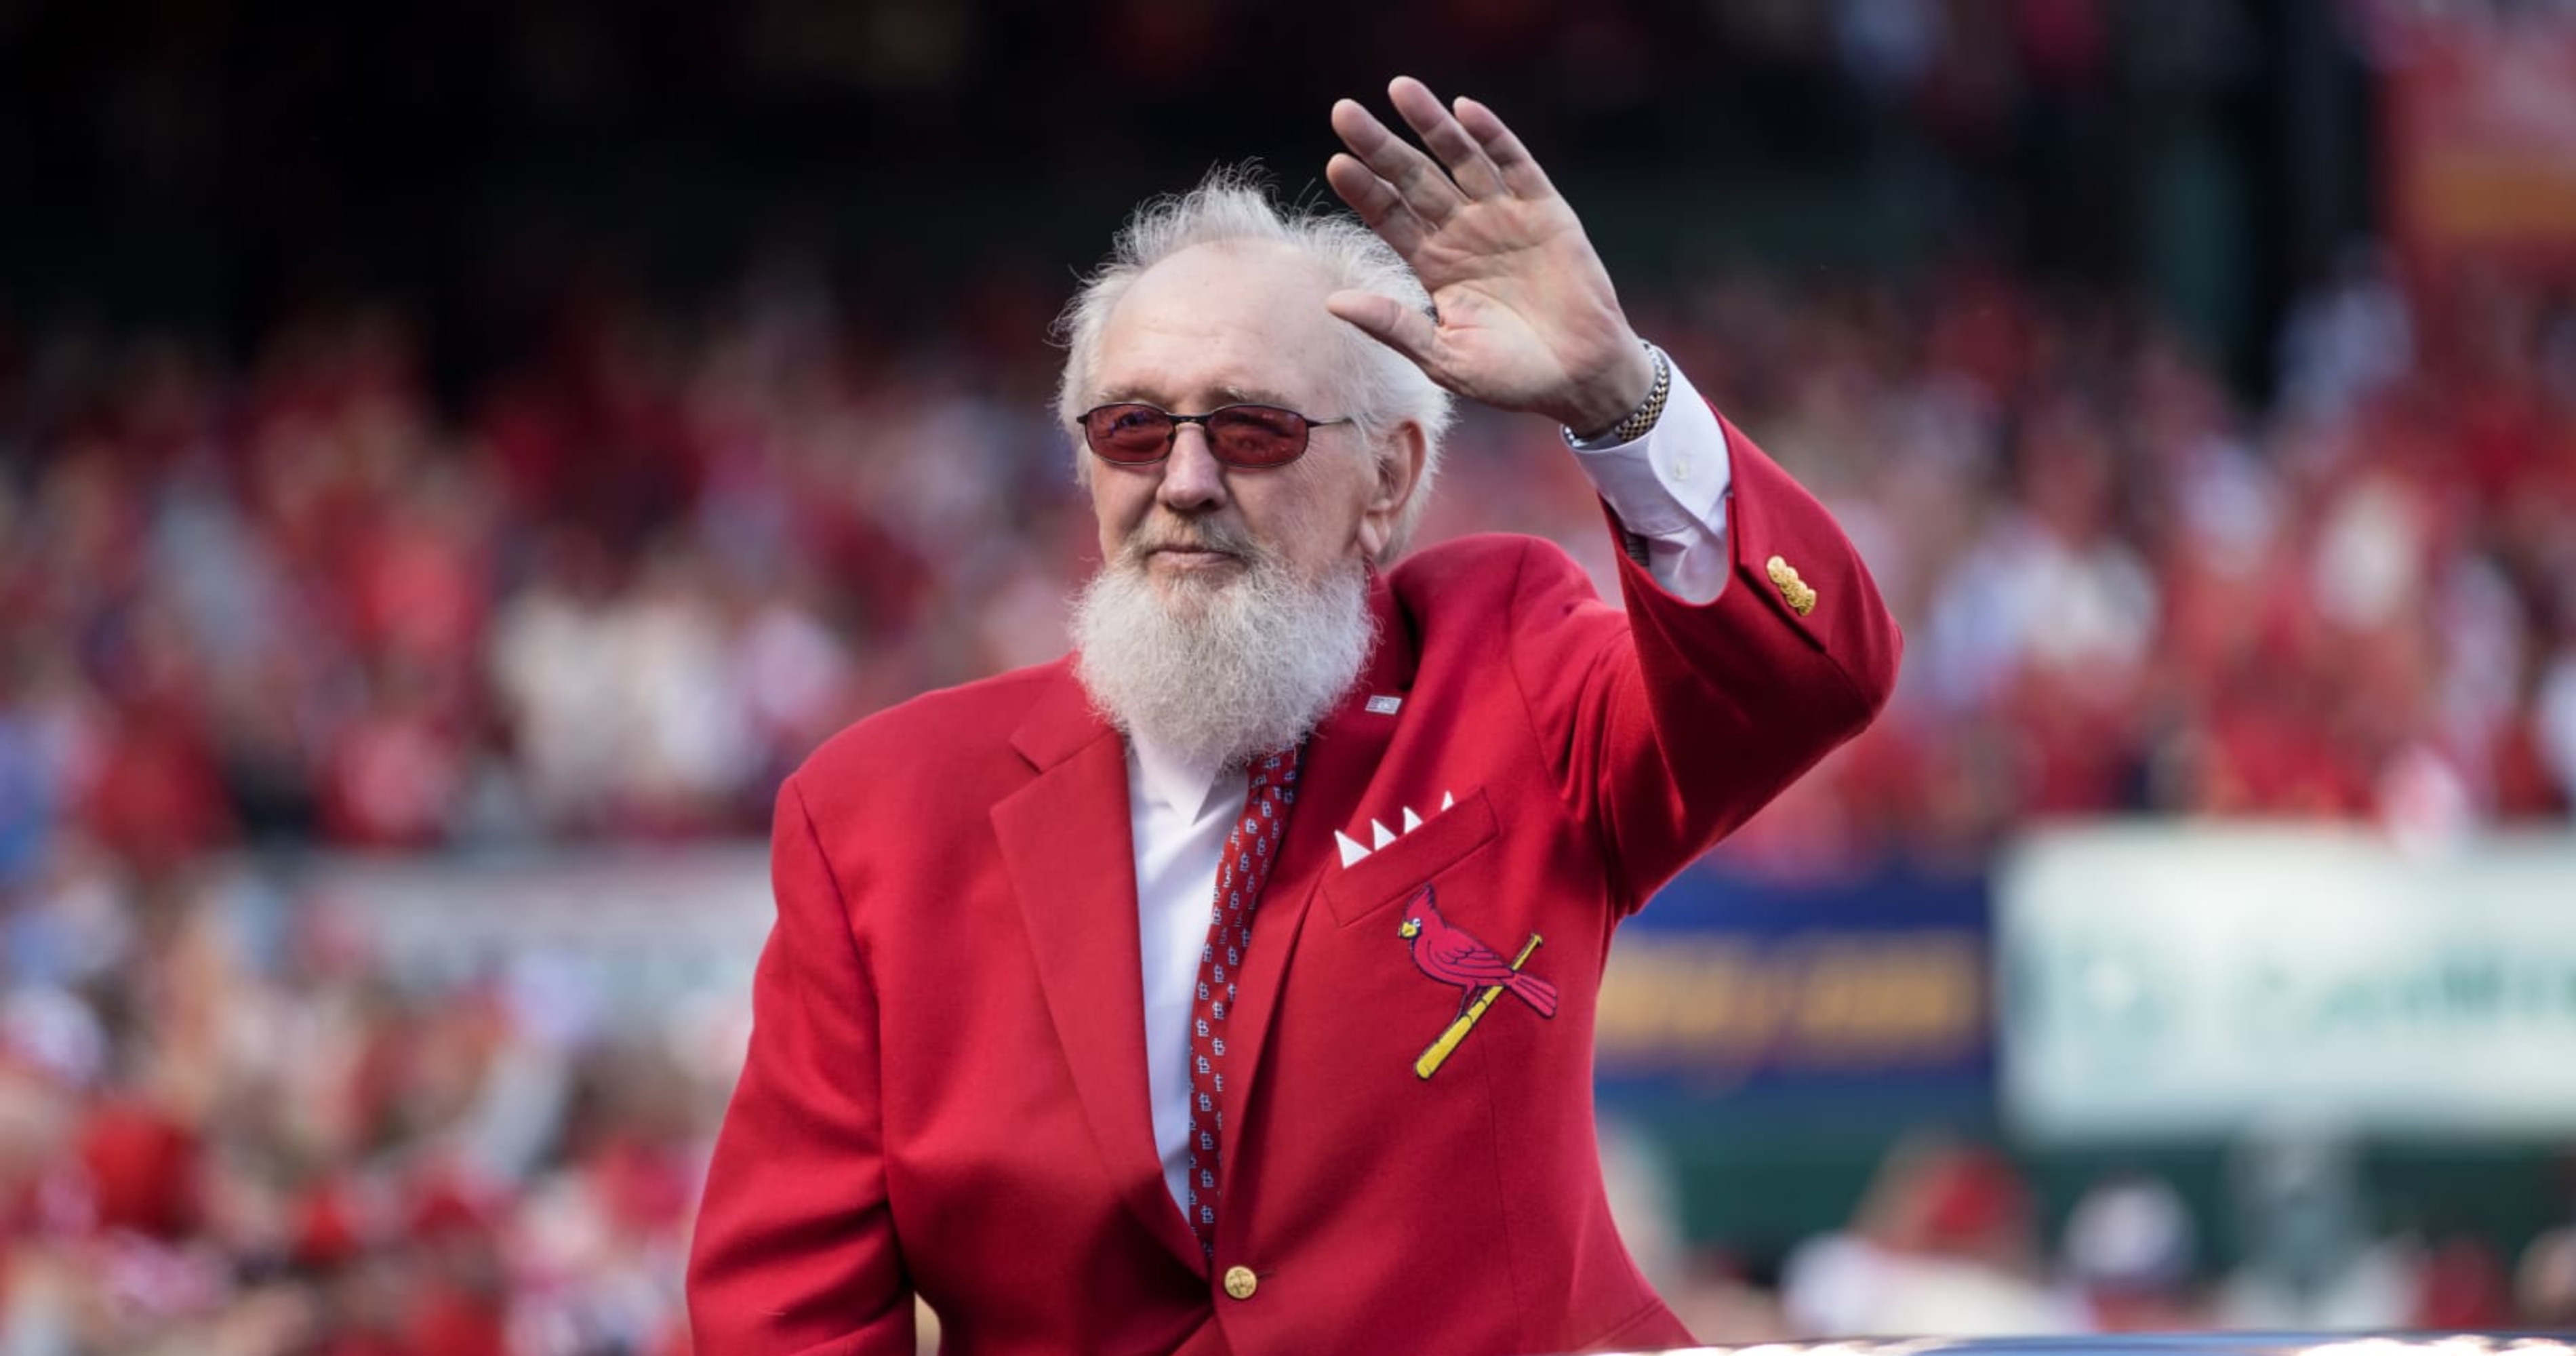 Bruce Sutter, Cardinals Legend and MLB Hall of Famer, Dies at Age 69